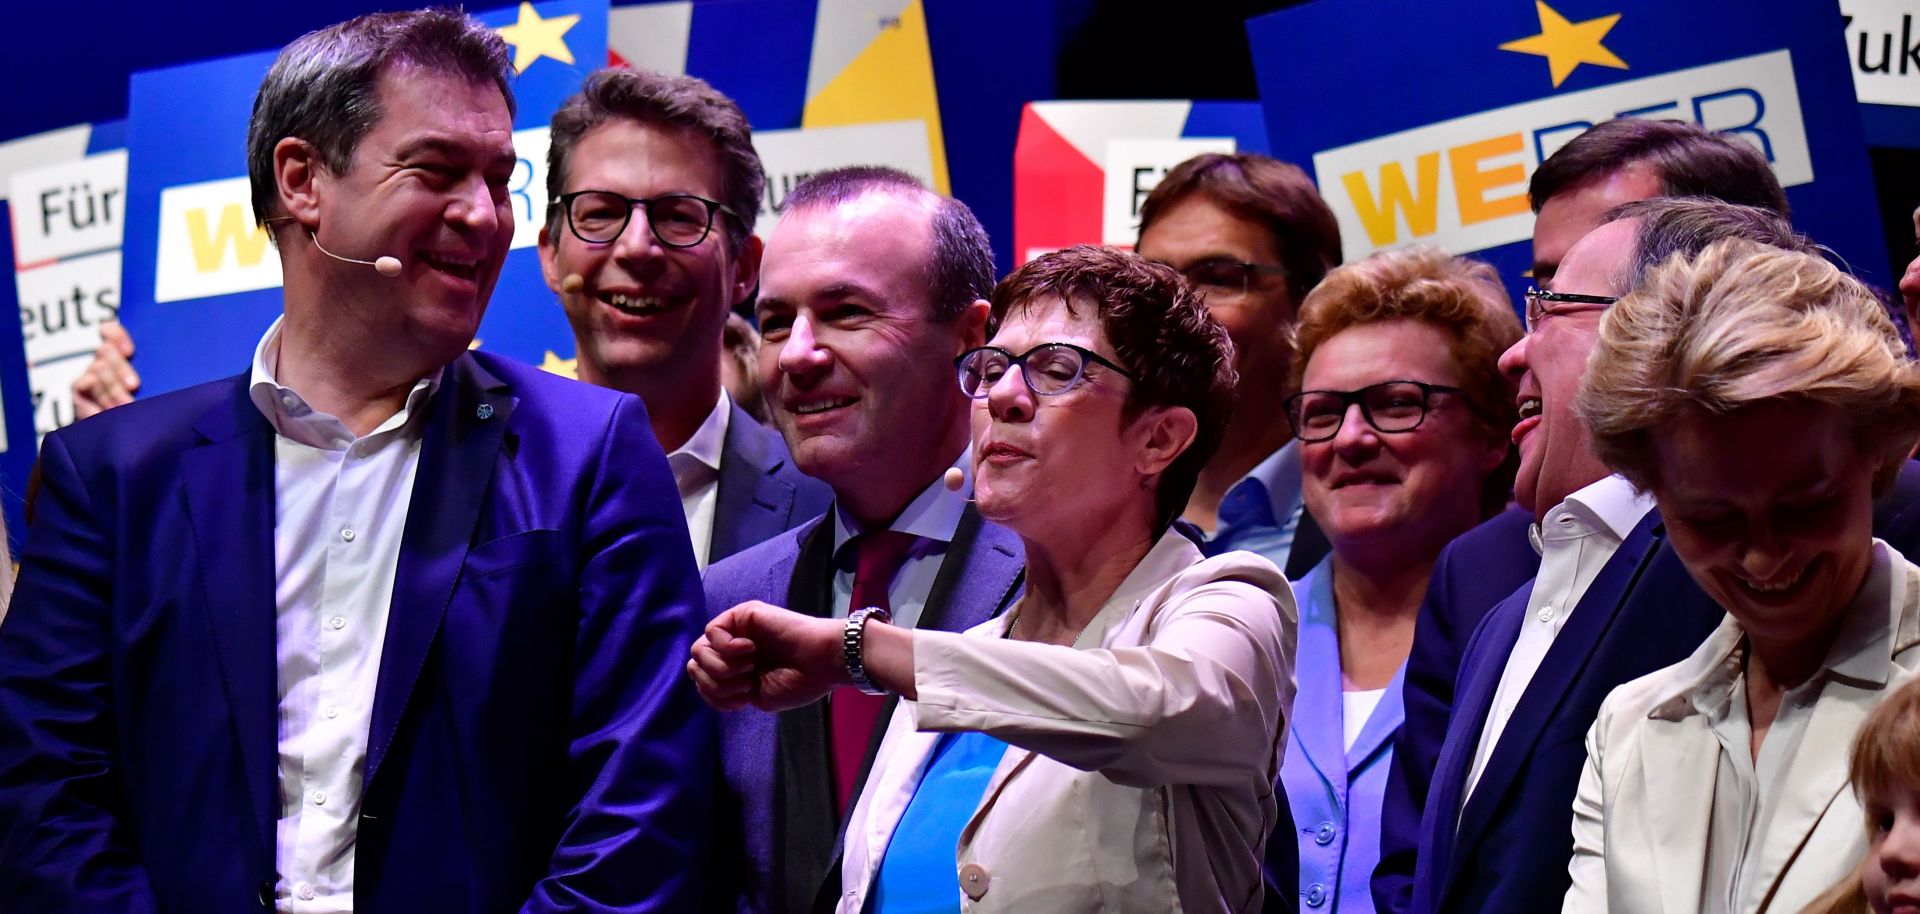 Members of Germany's ruling Christian Democratic Union (CDU) and Christian Social Union (CSU), including new CDU leader Annegret Kramp-Karrenbauer (C), launch the allied conservative parties' campaign for the European elections in an event in Muenster on April 27, 2019. 